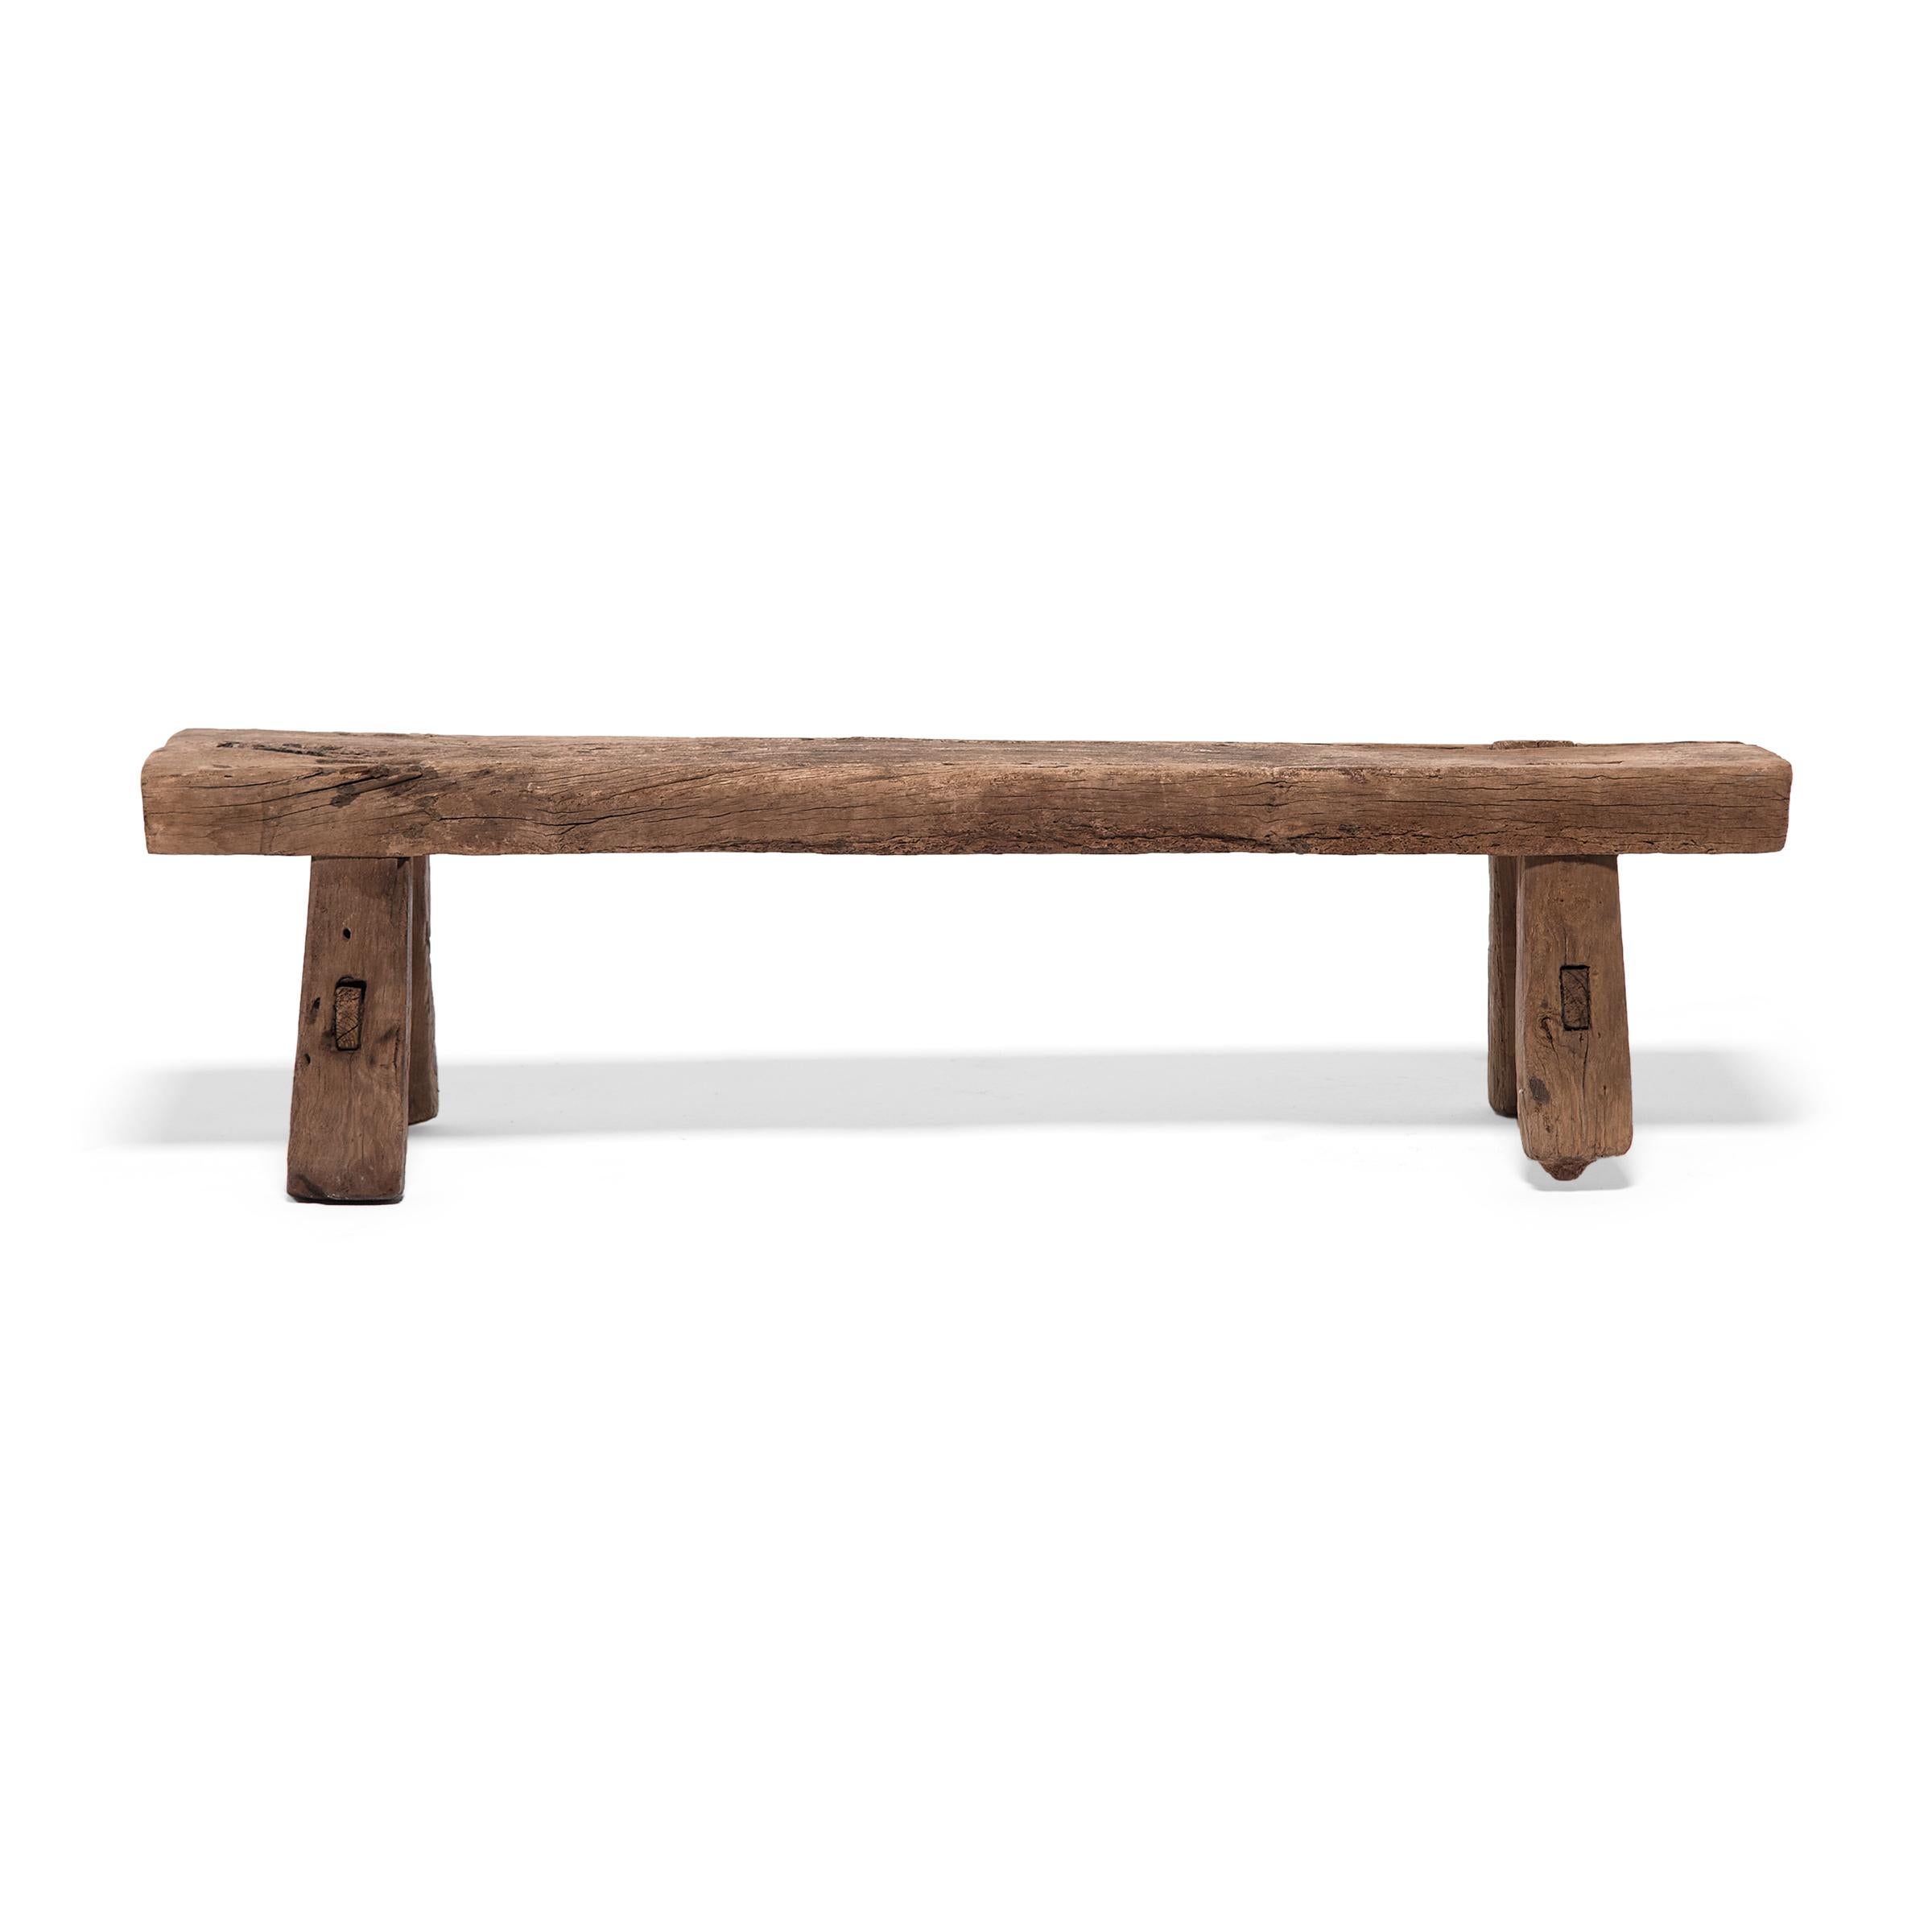 Embracing the raw beauty of unworked wood, this low bench from Hebei province is made from a single piece of unfinished elmwood timber. The plank-top bench was crafted at the turn of the century using mortise-and-tenon joinery techniques, and